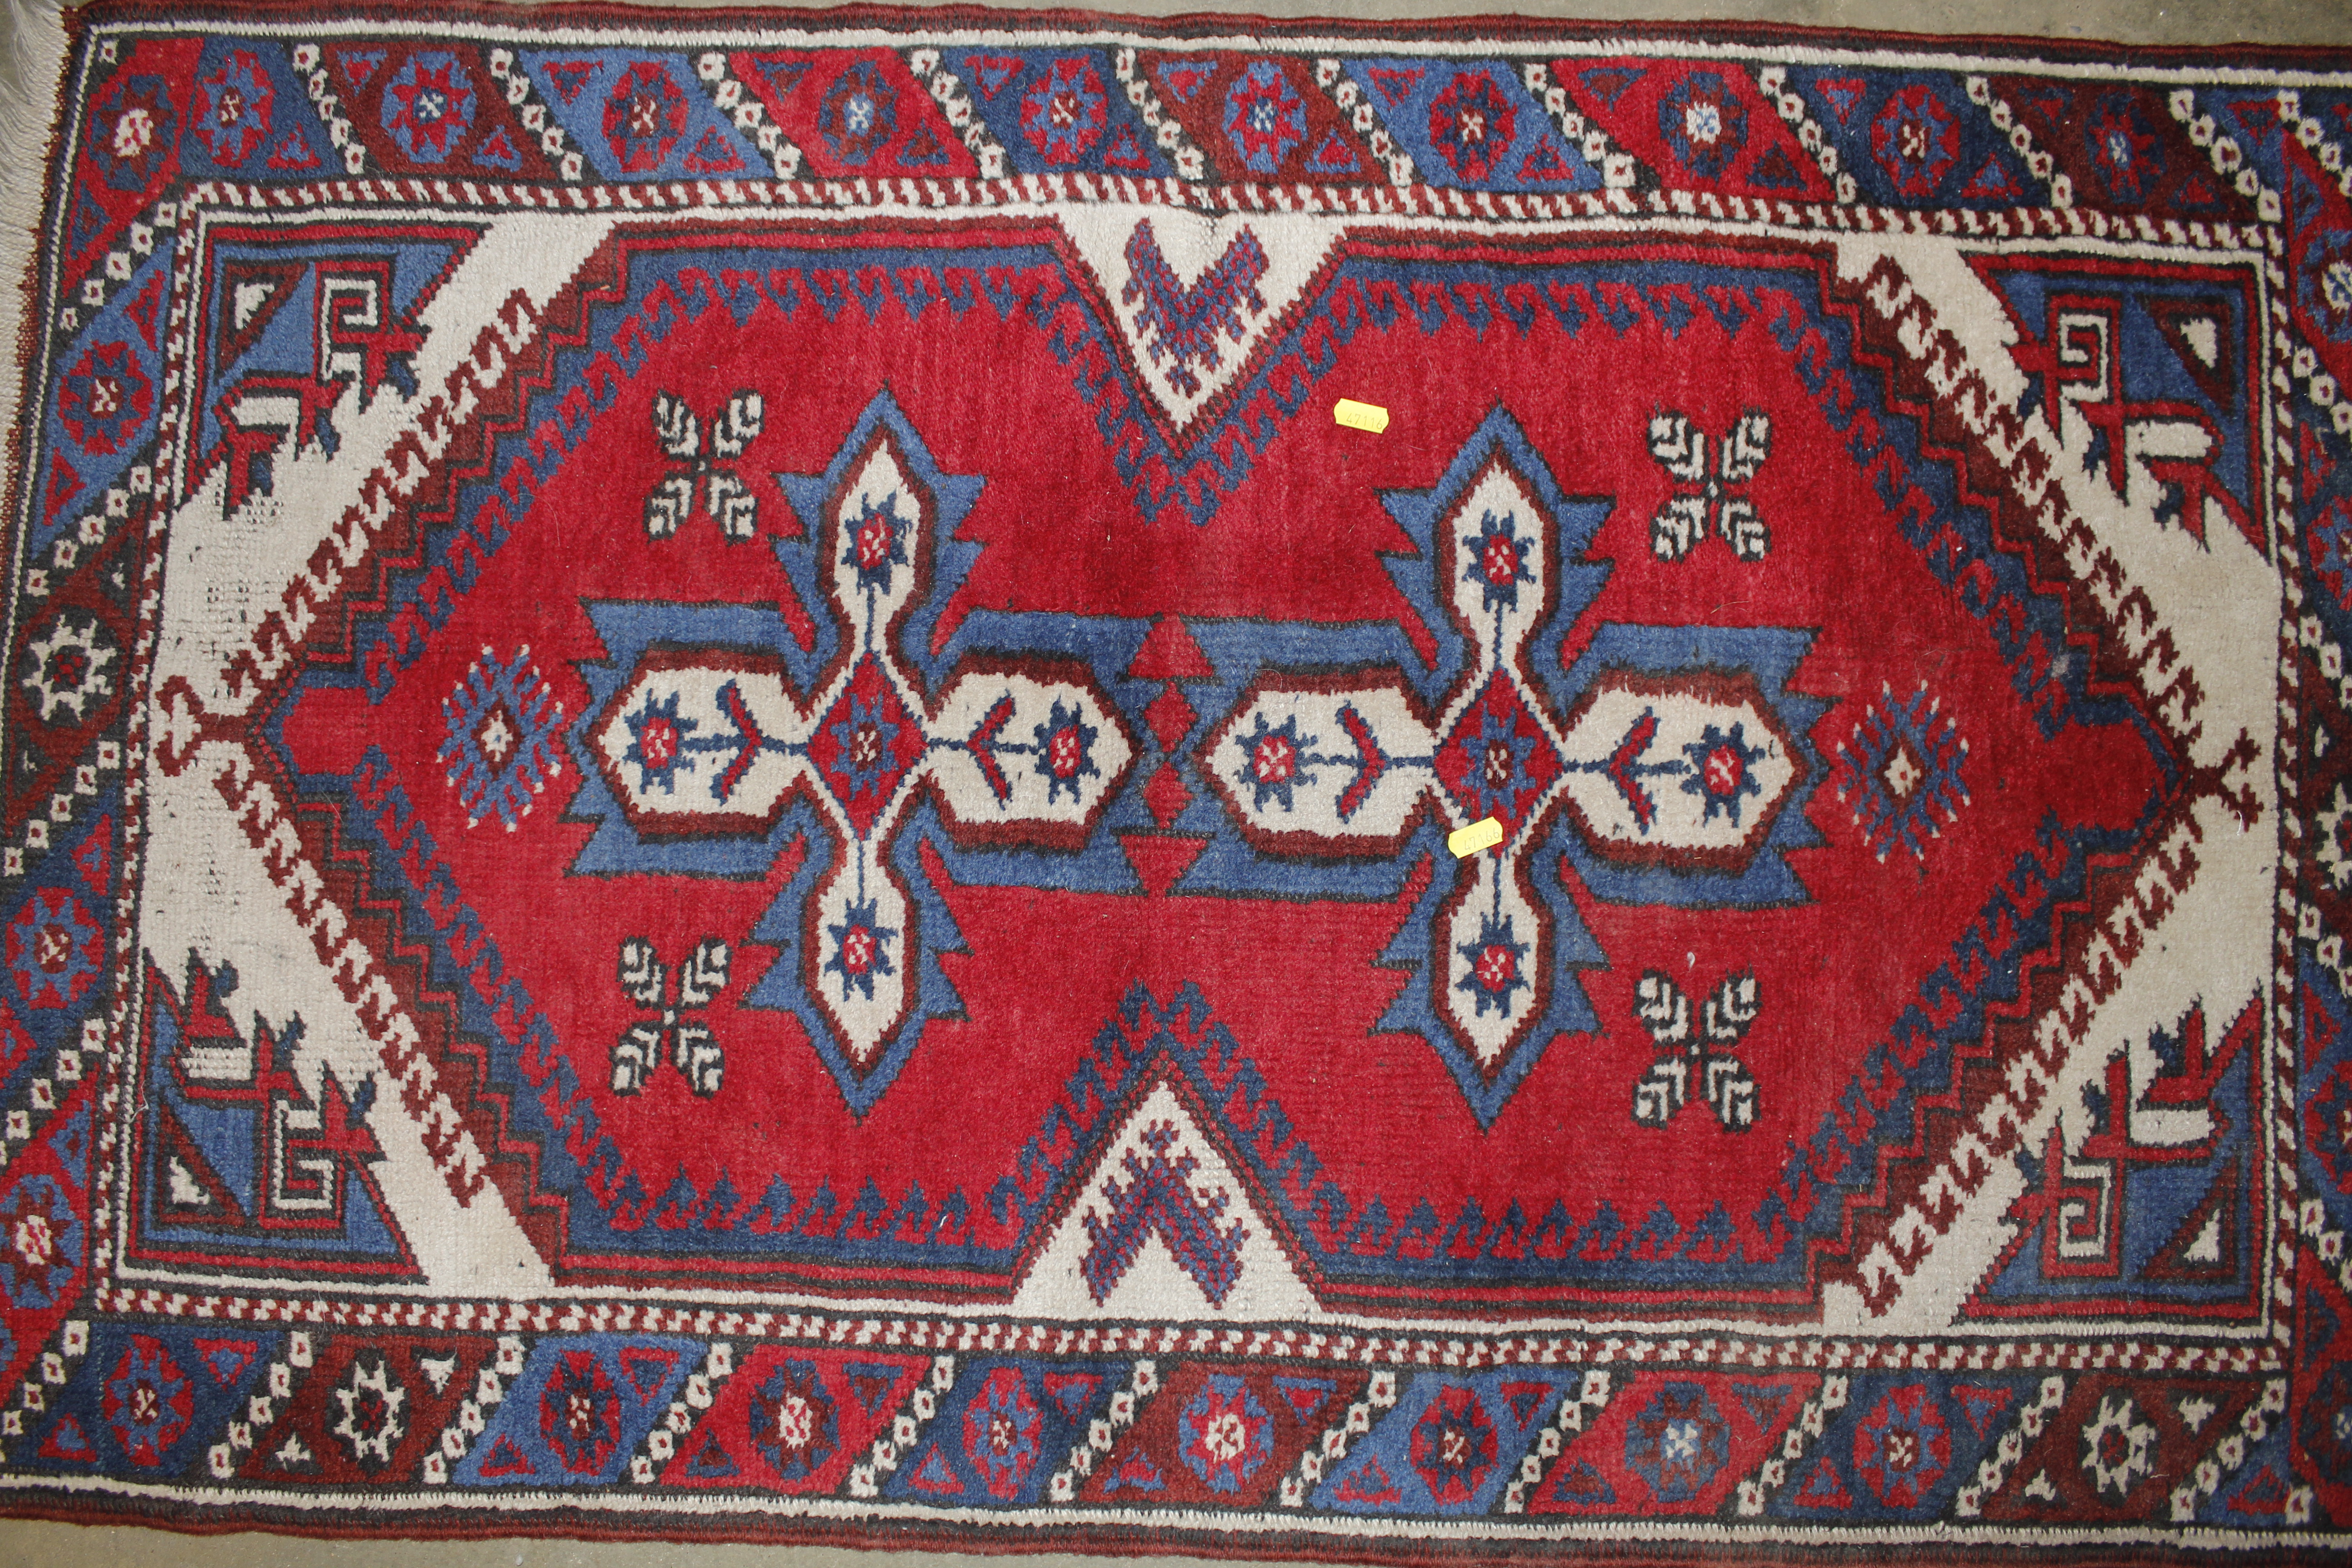 An approx. 4'2" x 2'5" red and blue patterned rug - Image 2 of 3